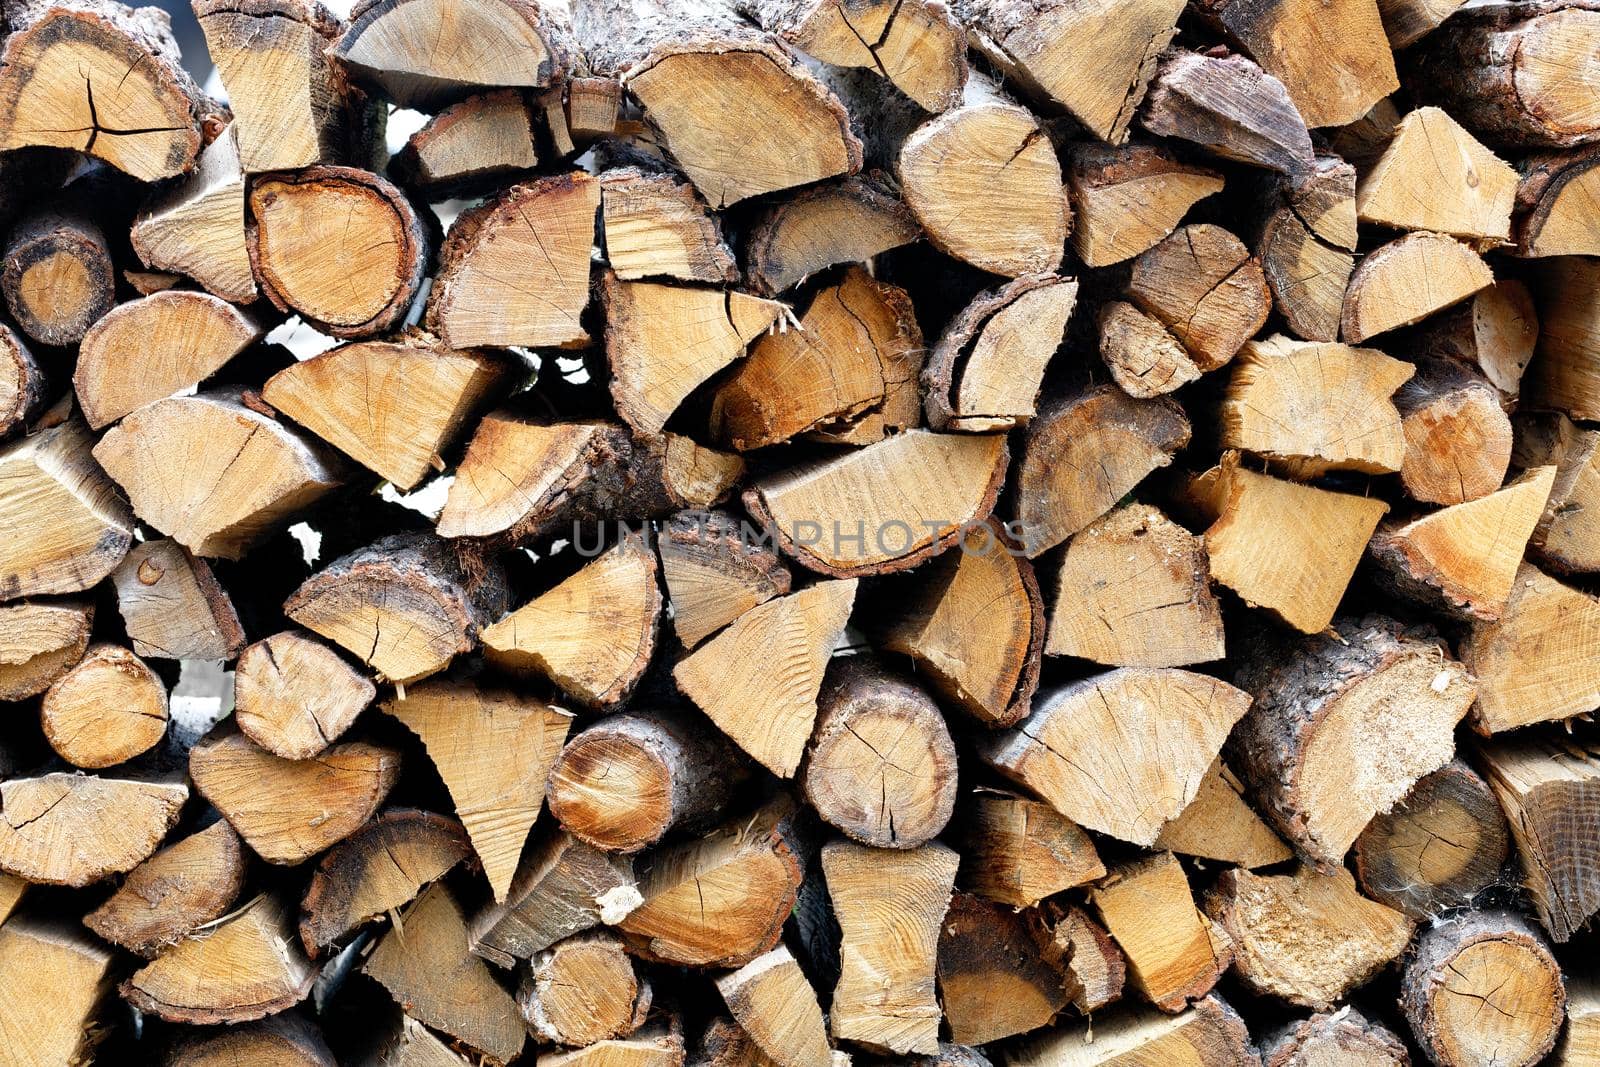 Coarsely chopped and neatly stacked firewood, prepared for the oven, natural oak grain.